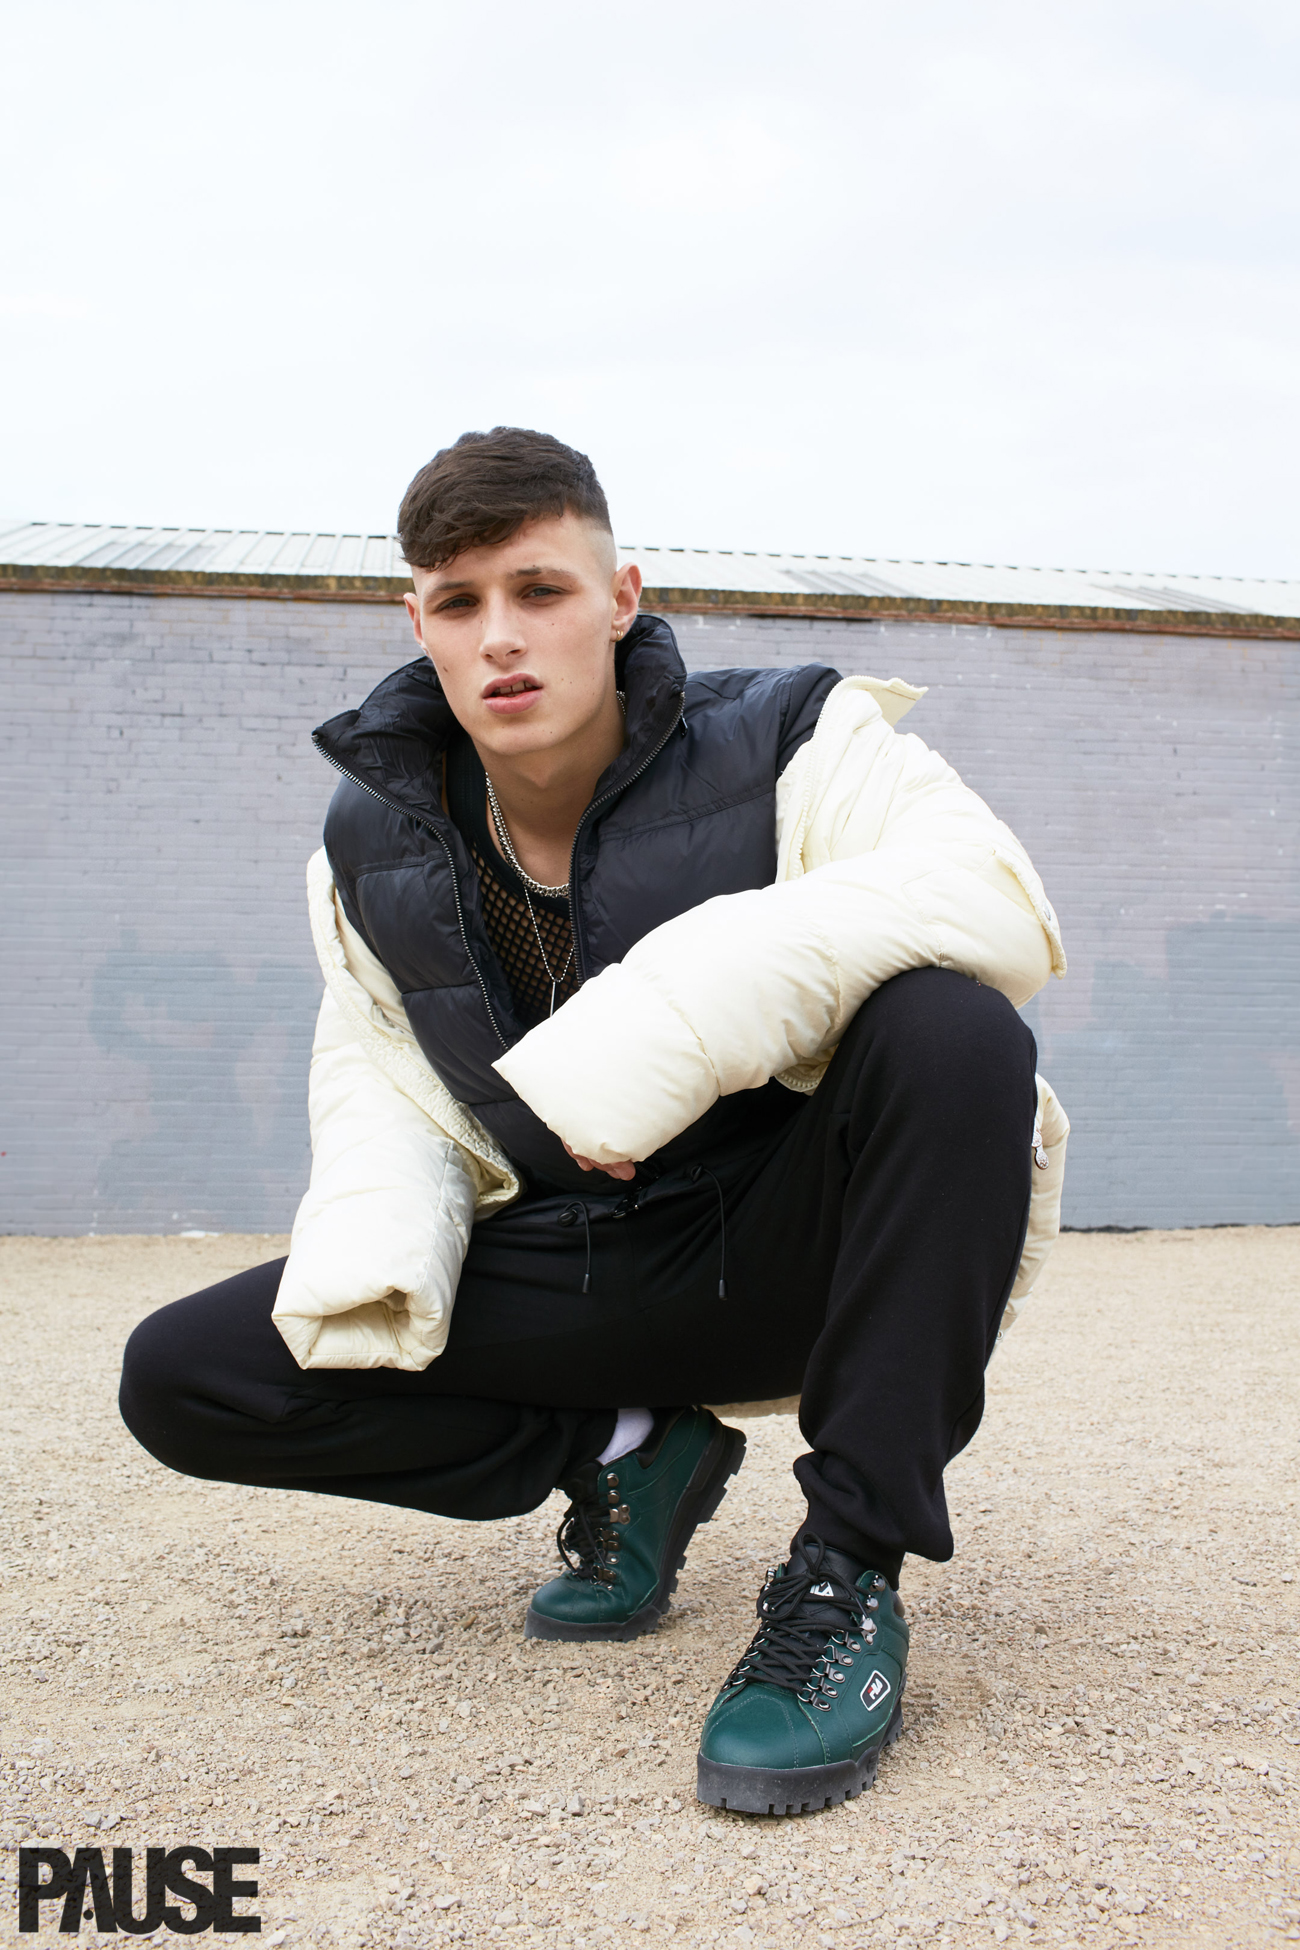 PAUSE Editorial: Cult Of Youth – PAUSE Online | Men's Fashion, Street ...